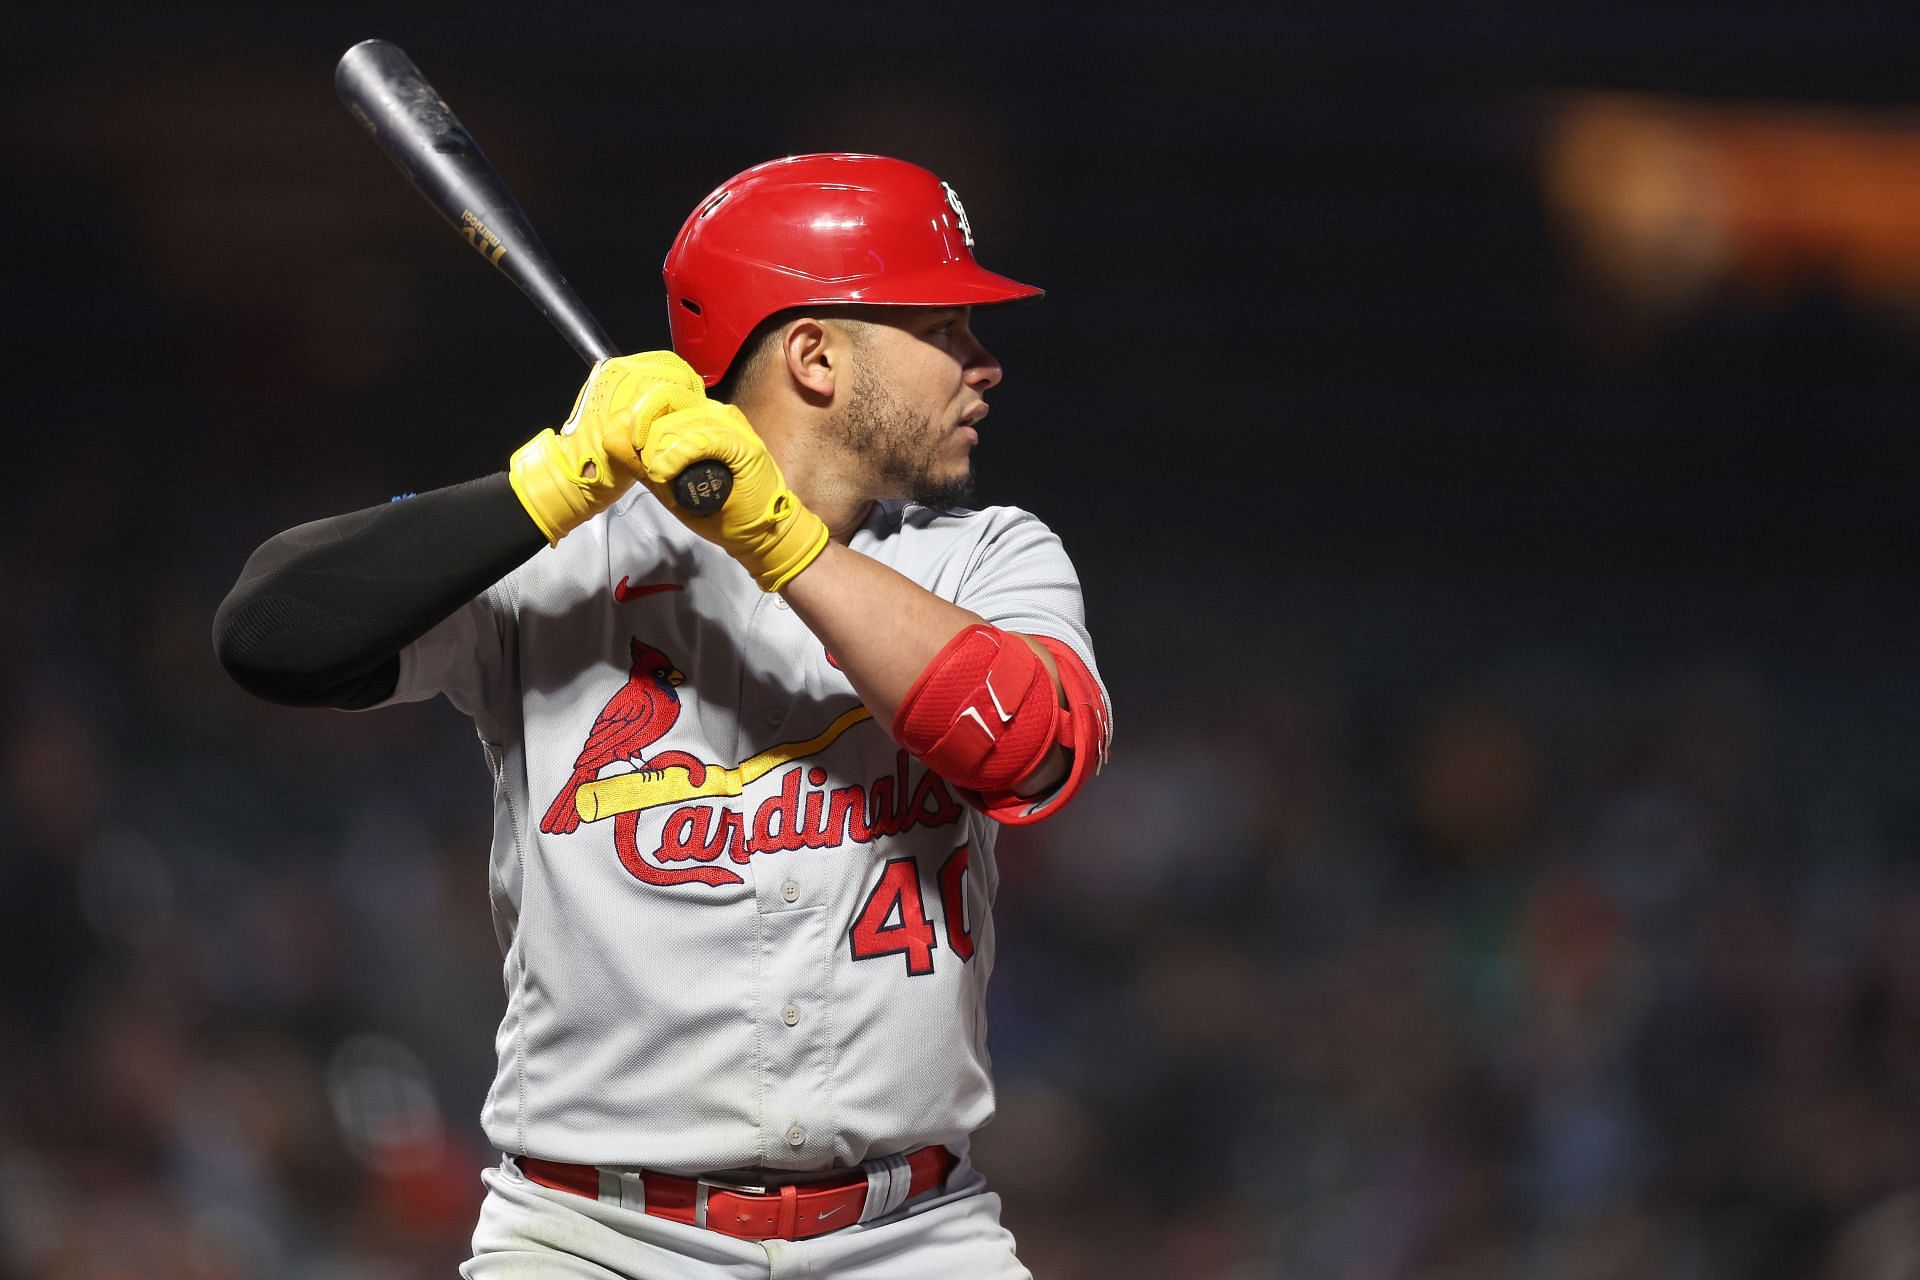 Cardinals catcher Willson Contreras finds support and improves his